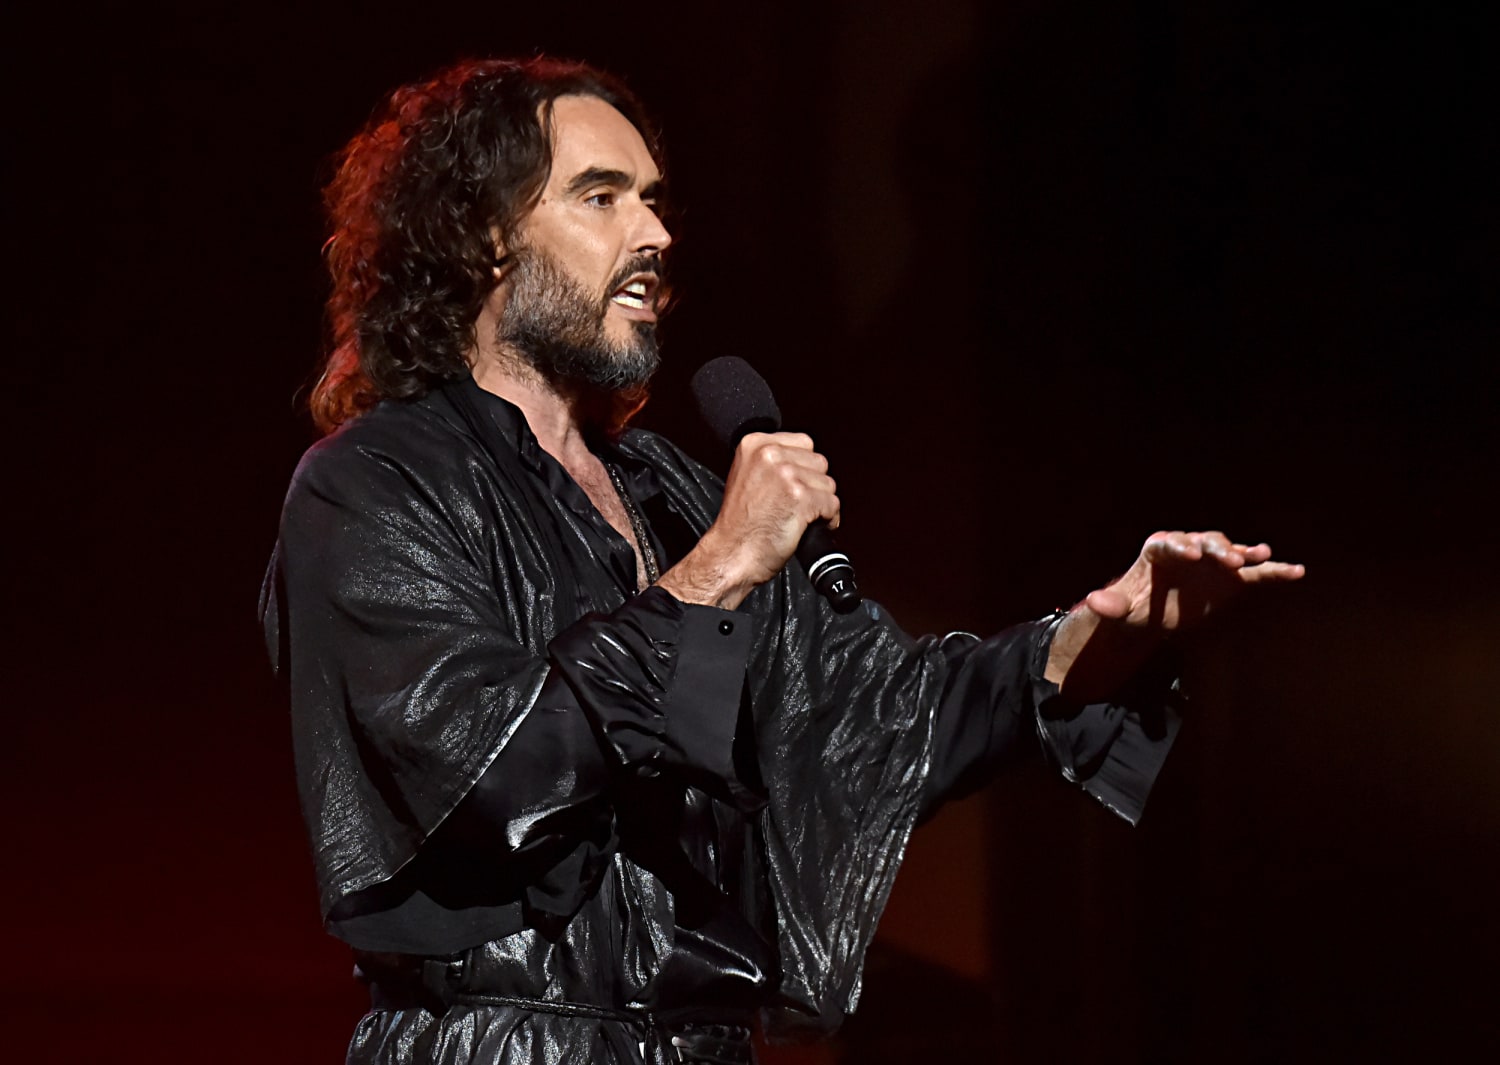 Agency drops Russell Brand and the Senate loosens its informal dress code: Morning Rundown